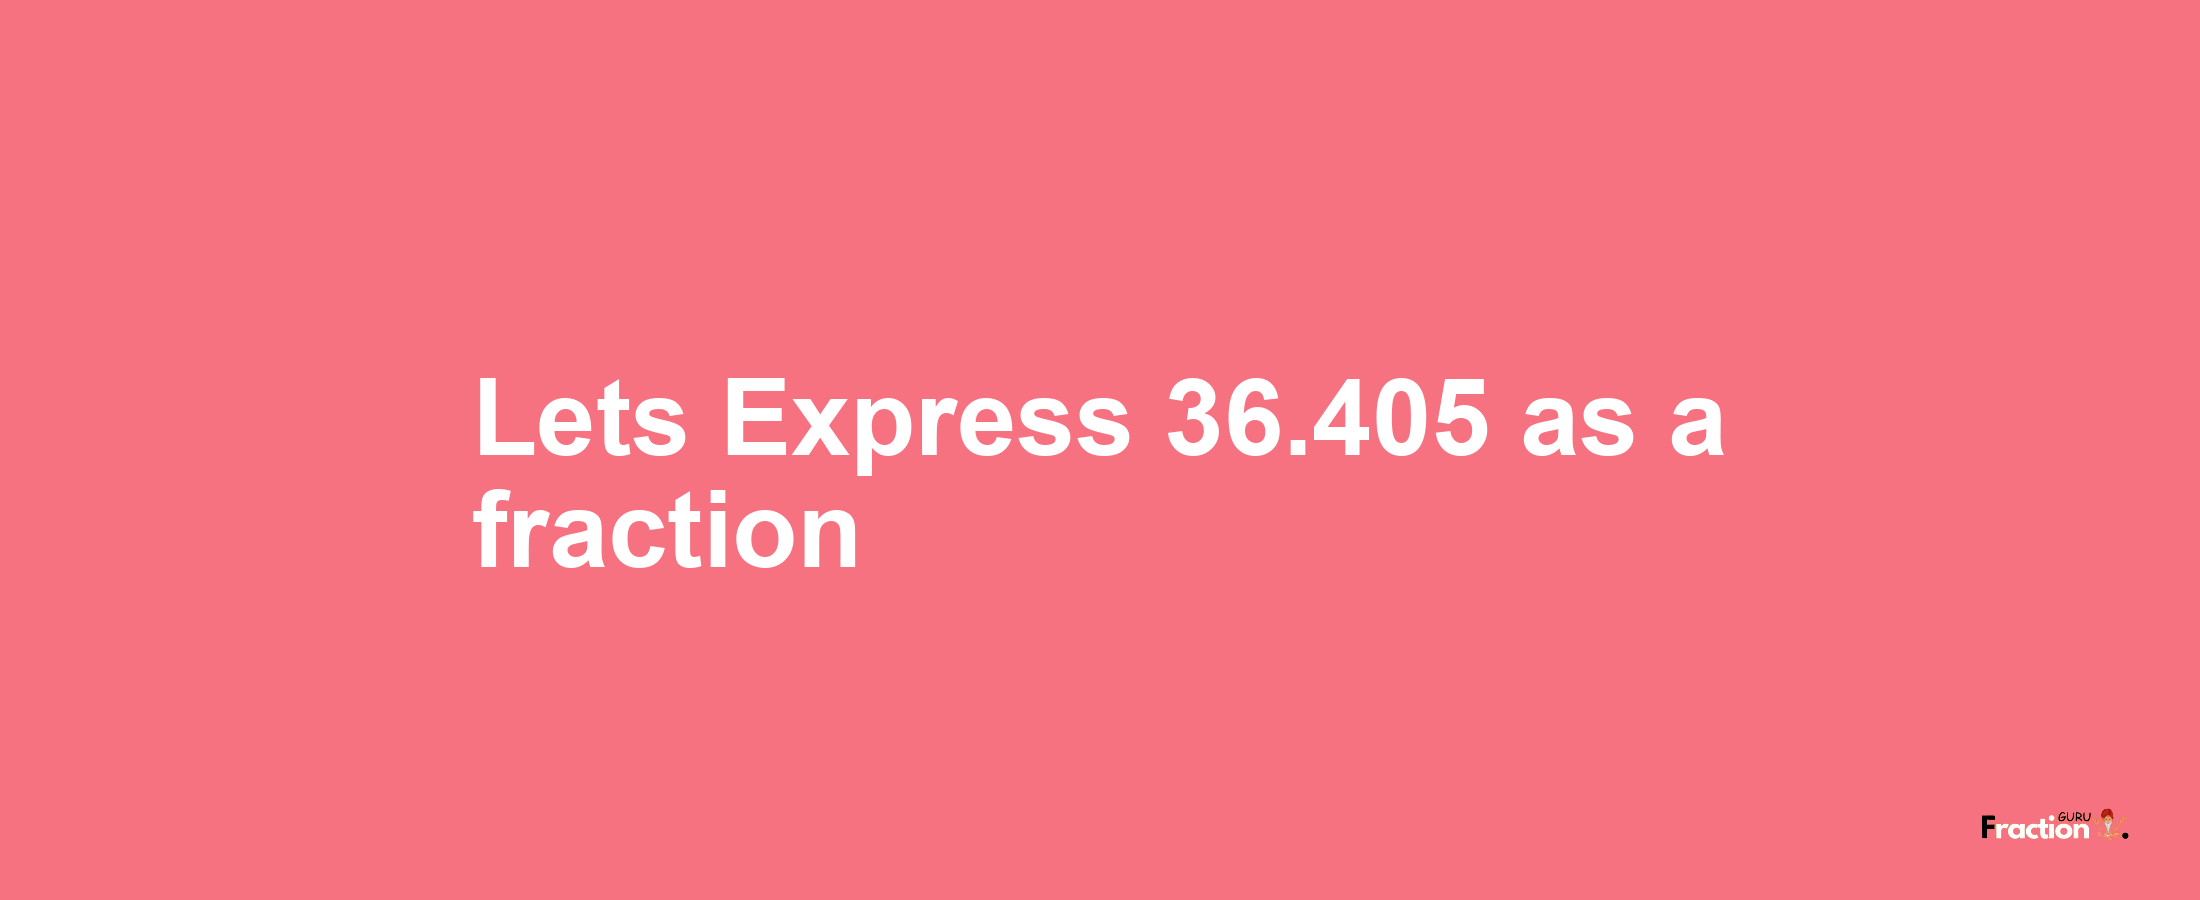 Lets Express 36.405 as afraction